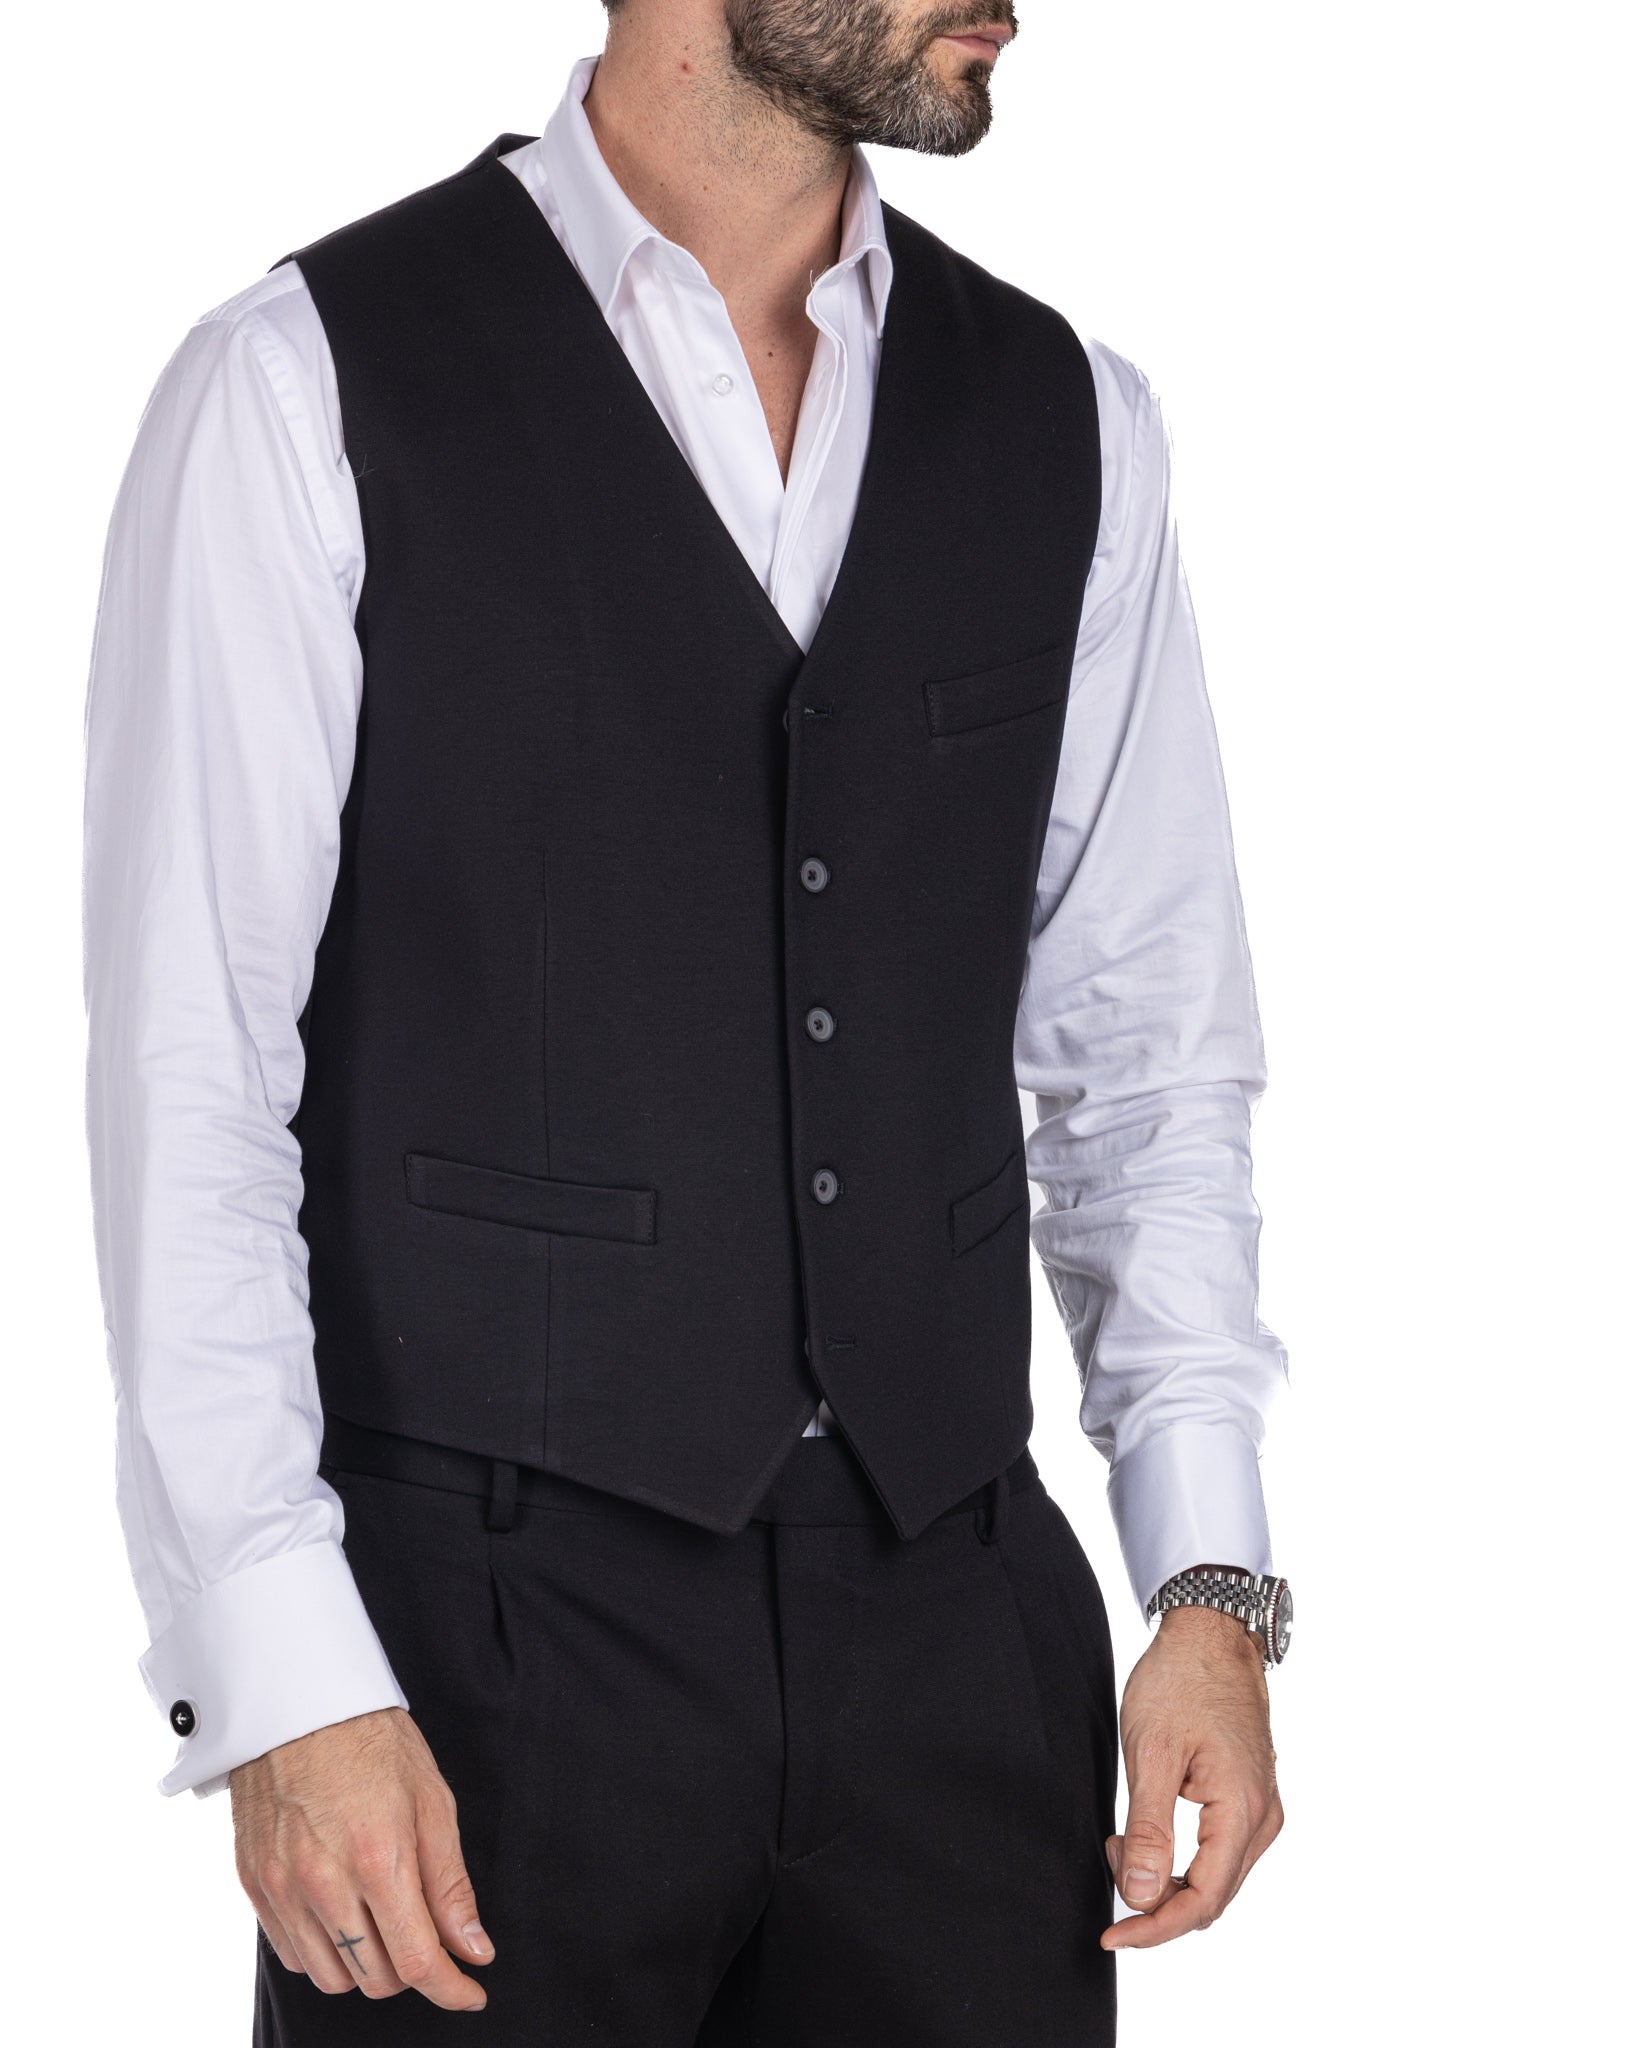 Mustang - single-breasted waistcoat in black milano stitch